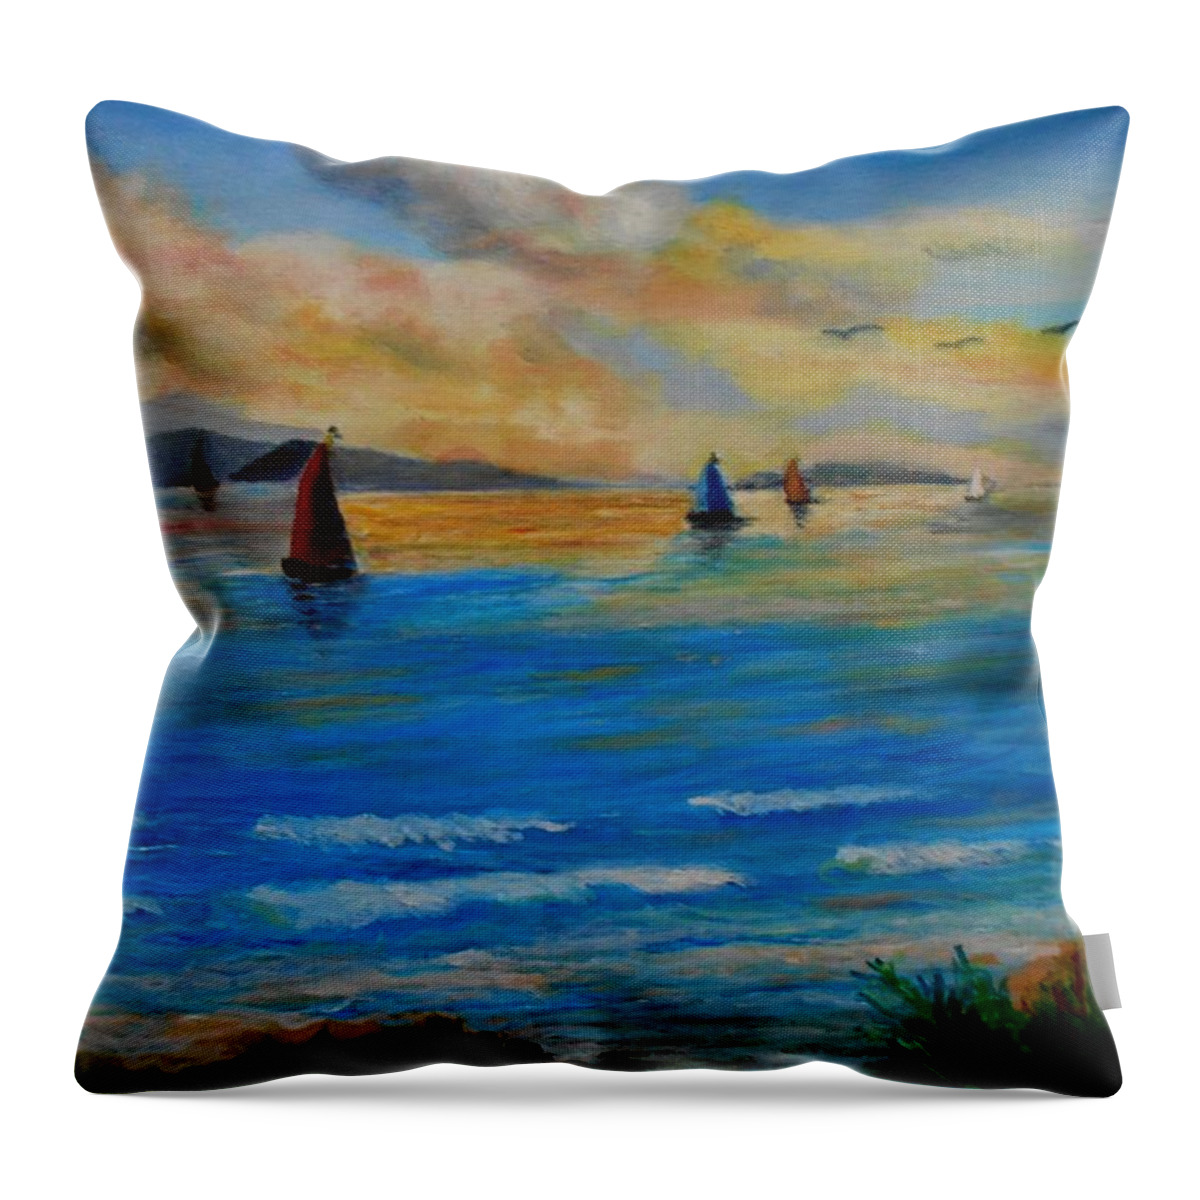 Sunsets Throw Pillow featuring the painting Sunset Sailing by Konstantinos Charalampopoulos